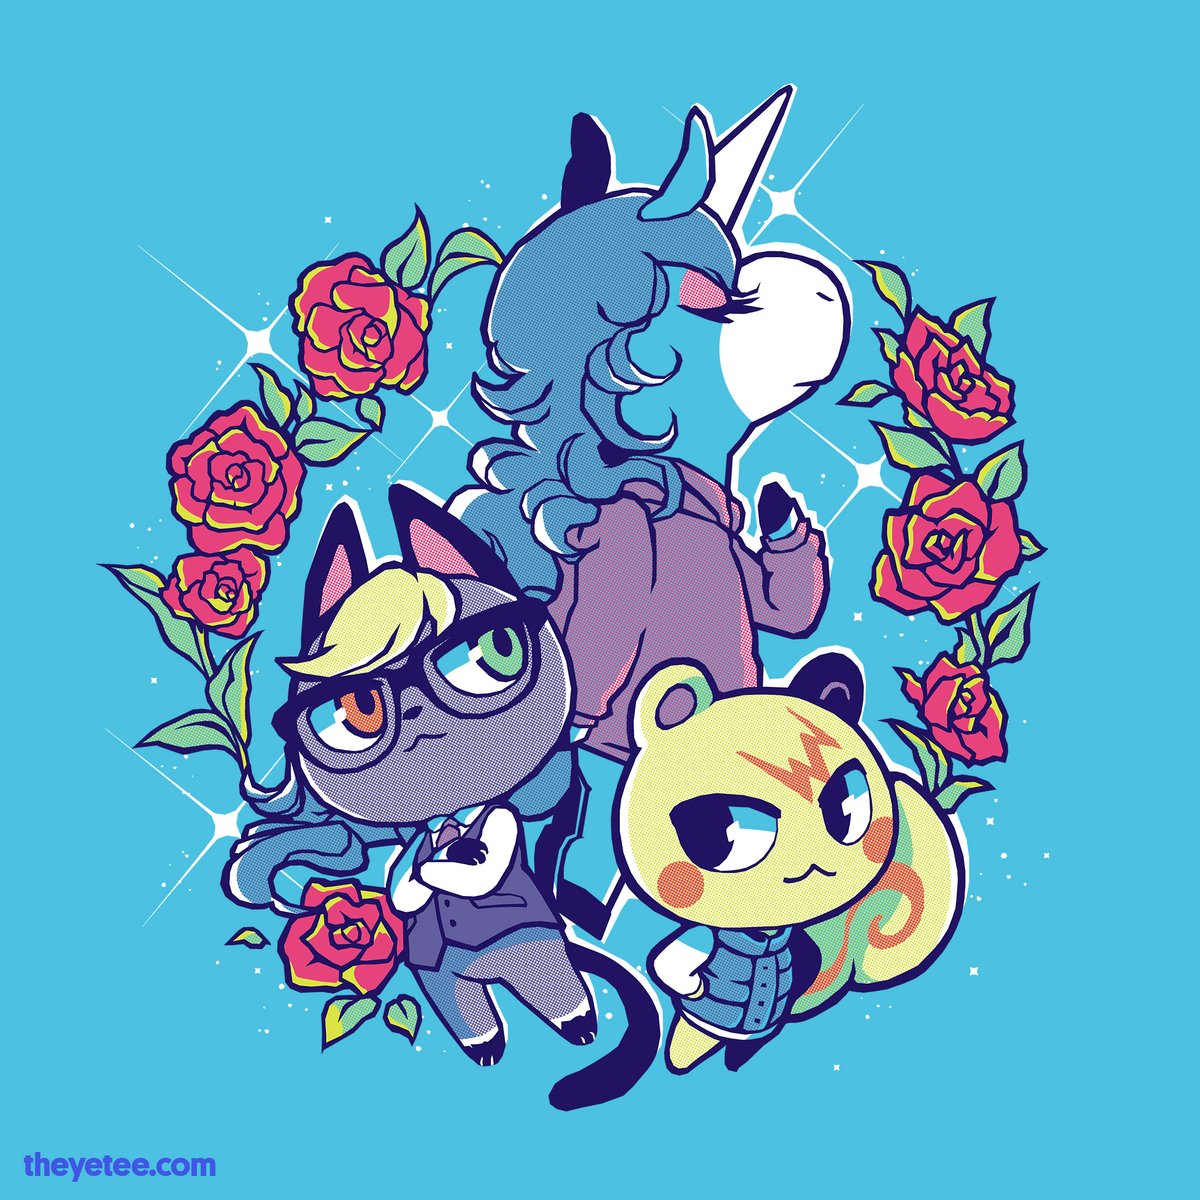 「And how's your neighbor doing these days」|The Yetee 🌈のイラスト